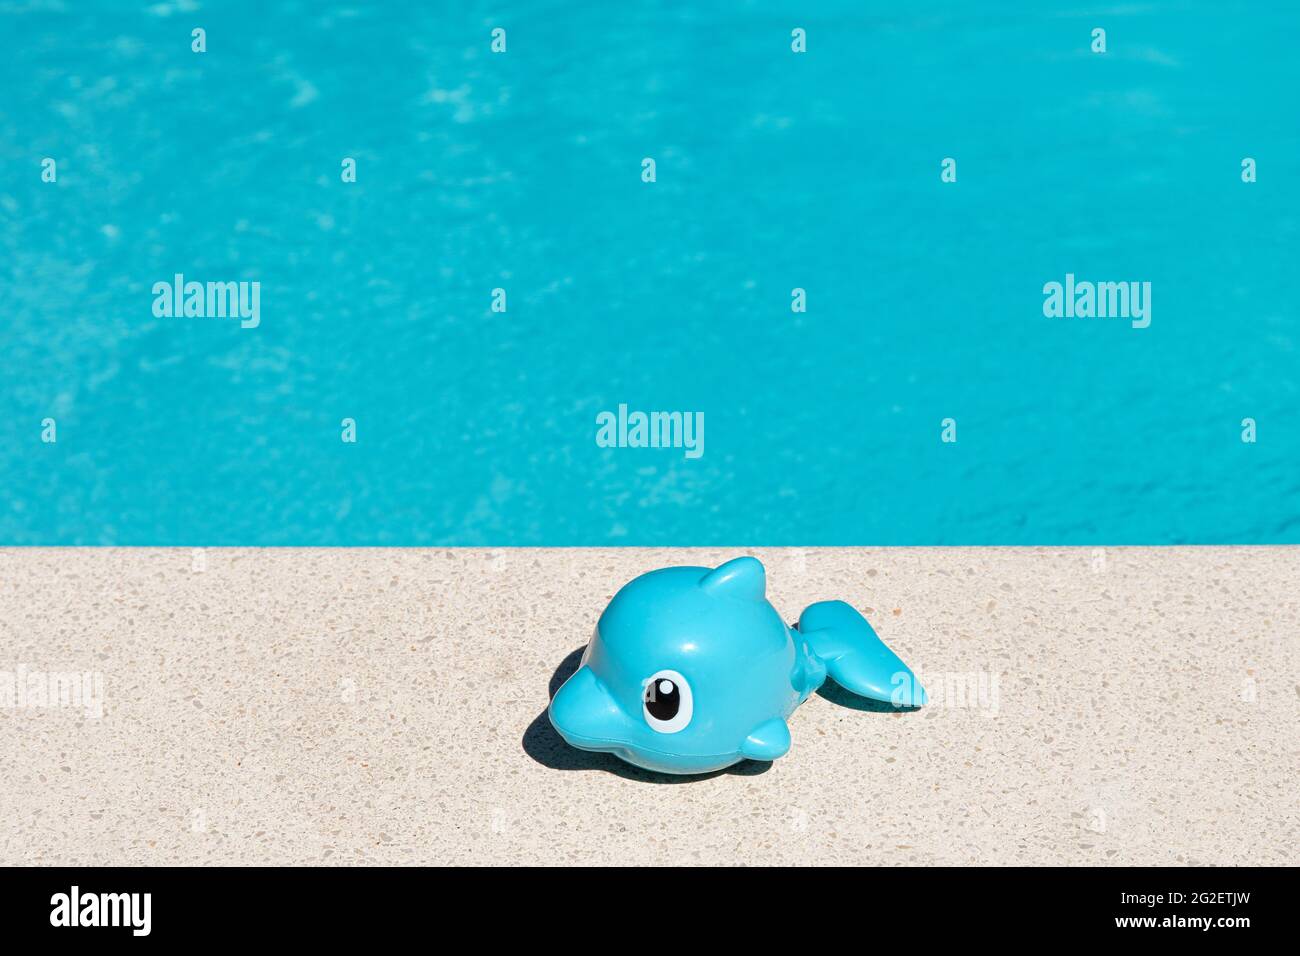 Cute Toy Fish on swimming pool border. Summertime enjoyment concept background. Copy space Stock Photo